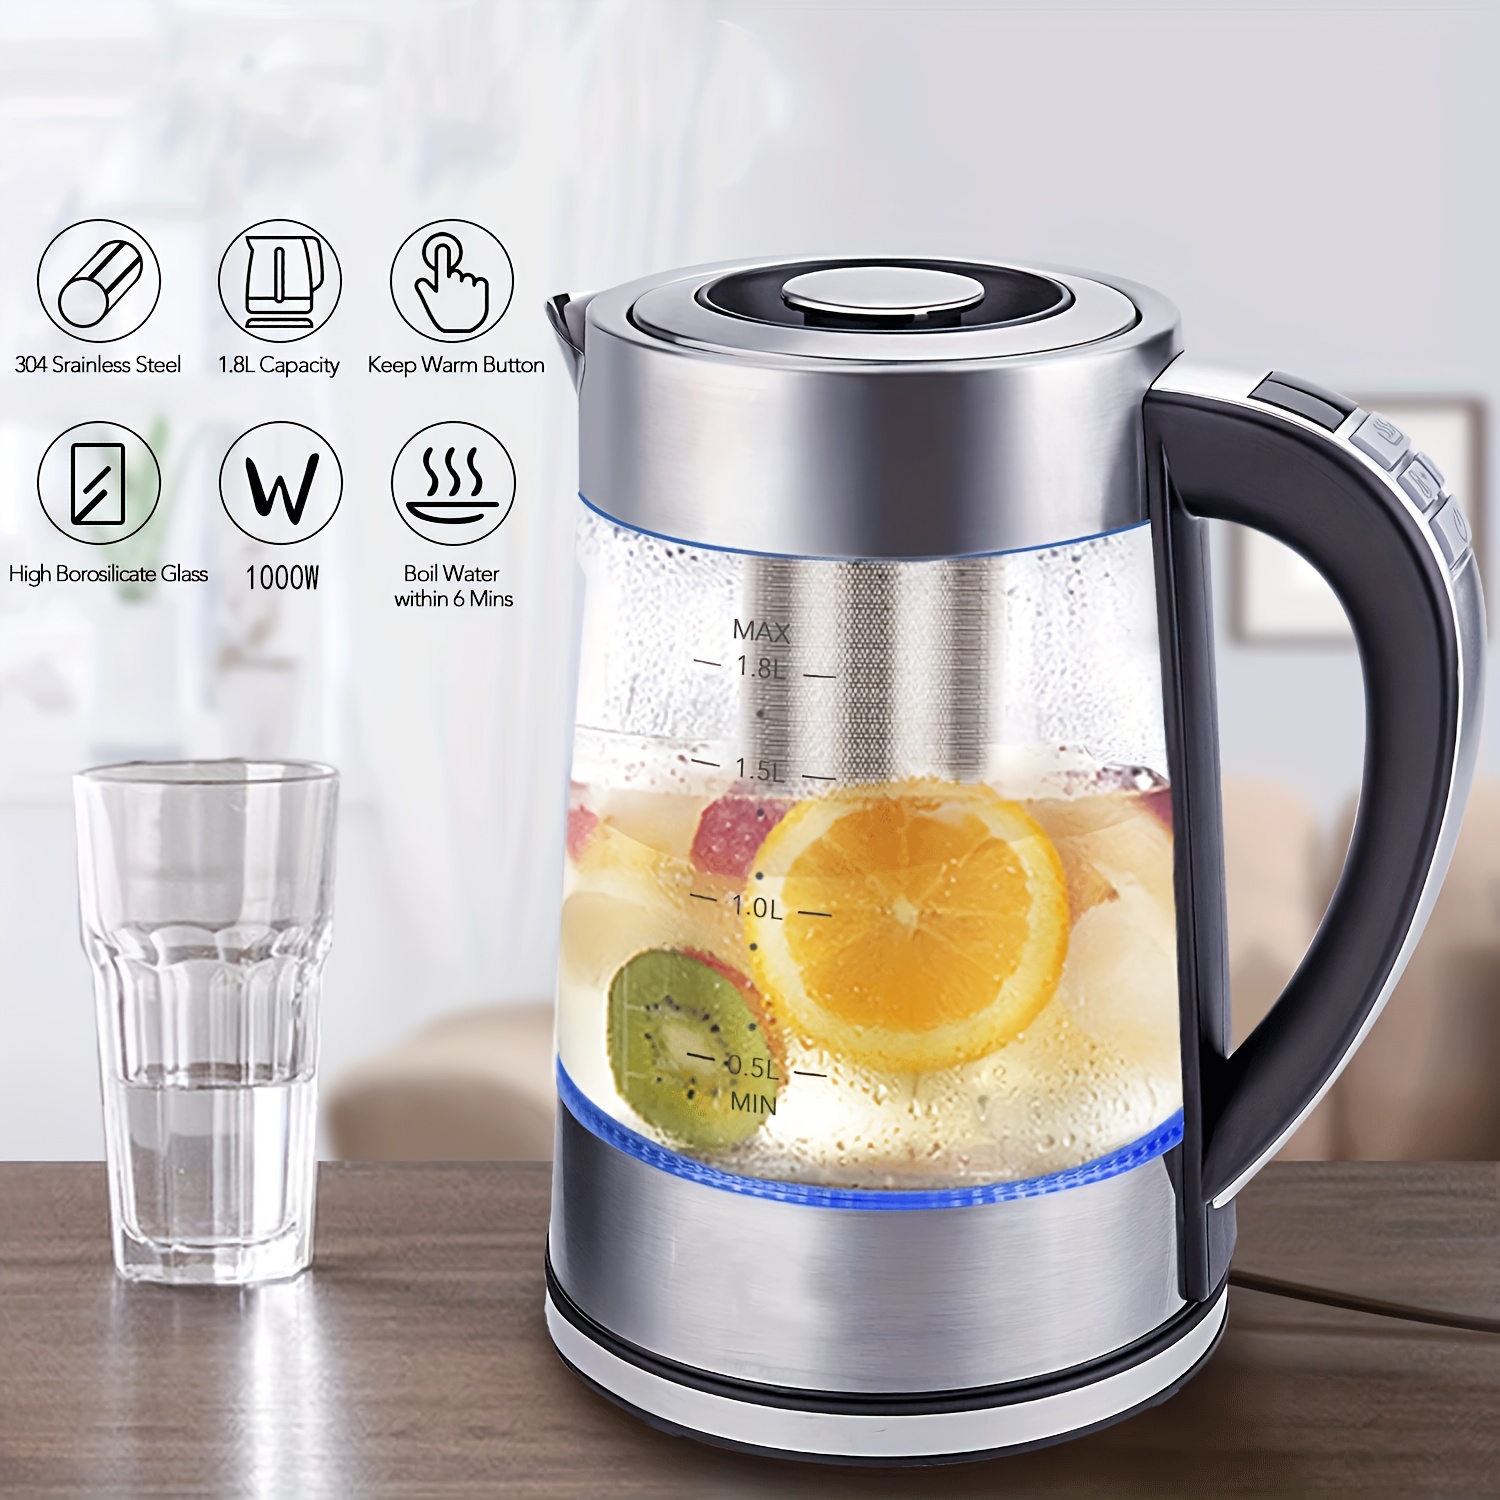 SUPOR Insulation Electric Kettle 1.5L Capacity High Quality Glass